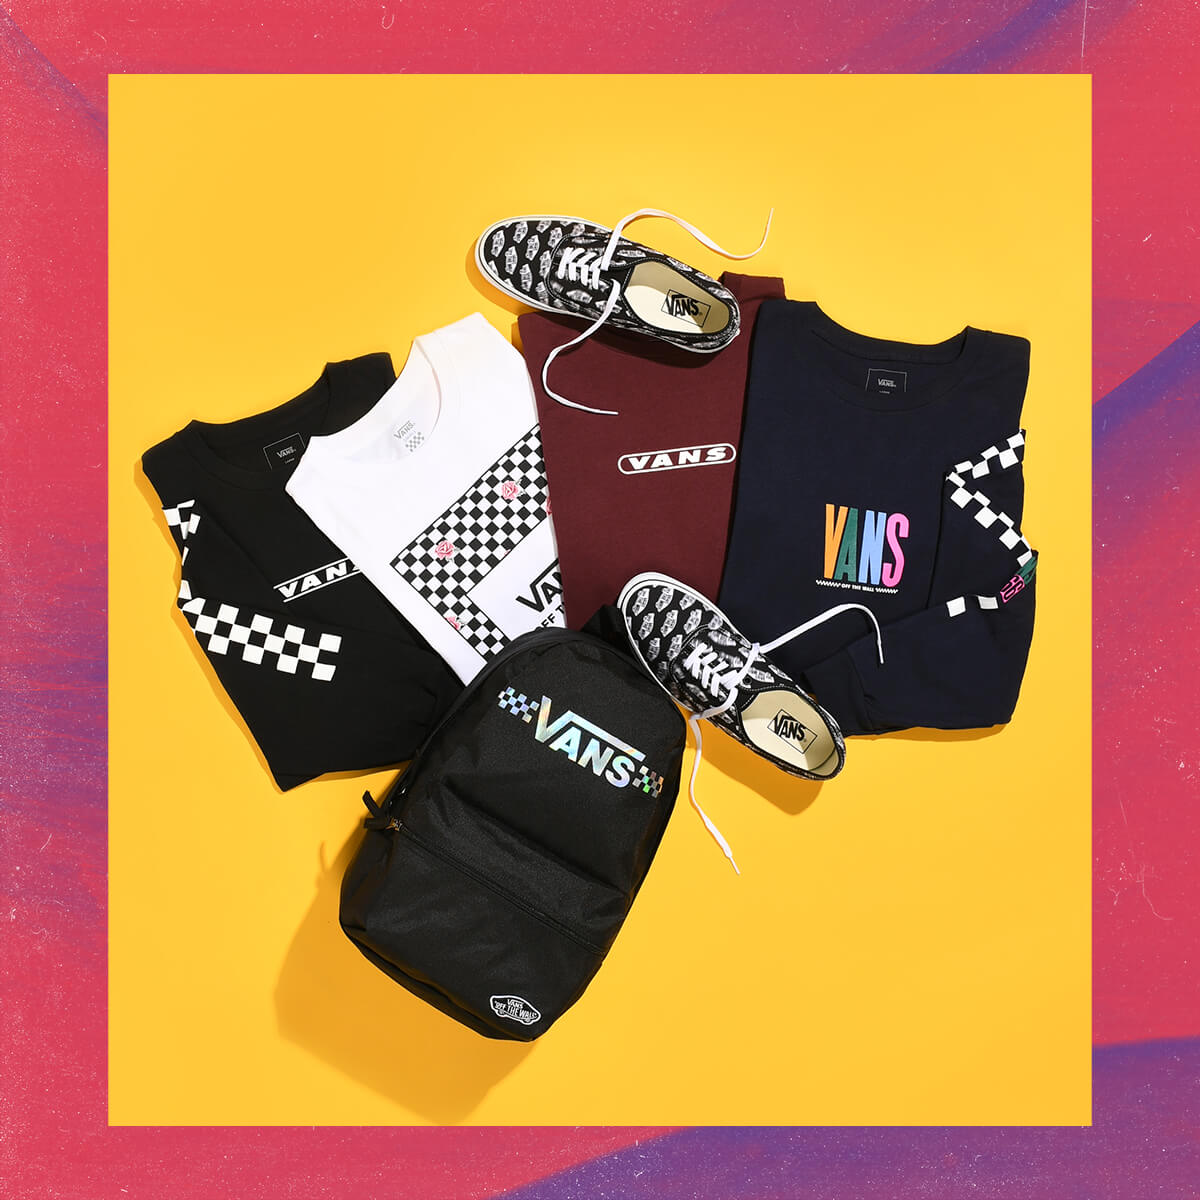 NEW ARRIVALS FROM VANS - SHOP NOW